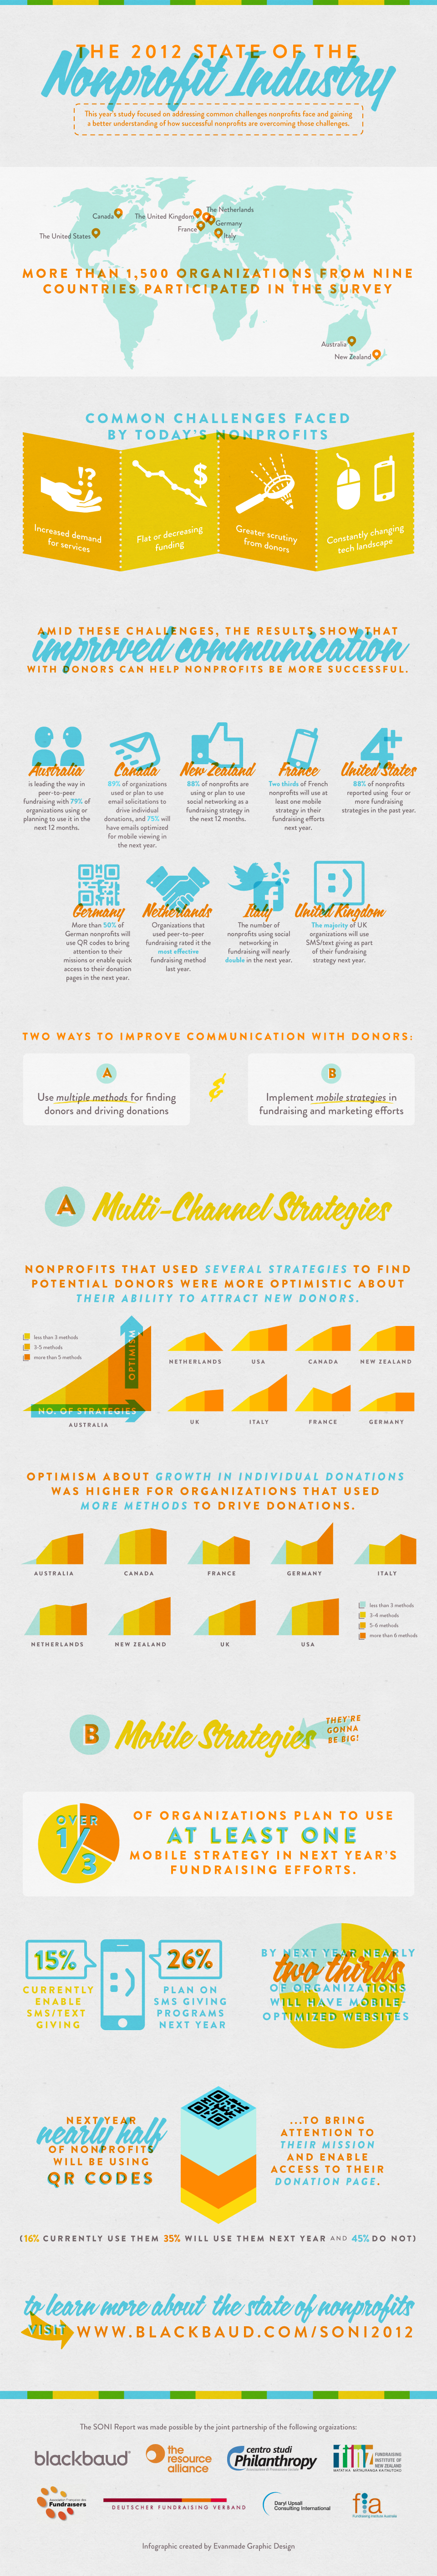 State Of The Nonprofit Industry INFOGRAPHIC by Blackbaud